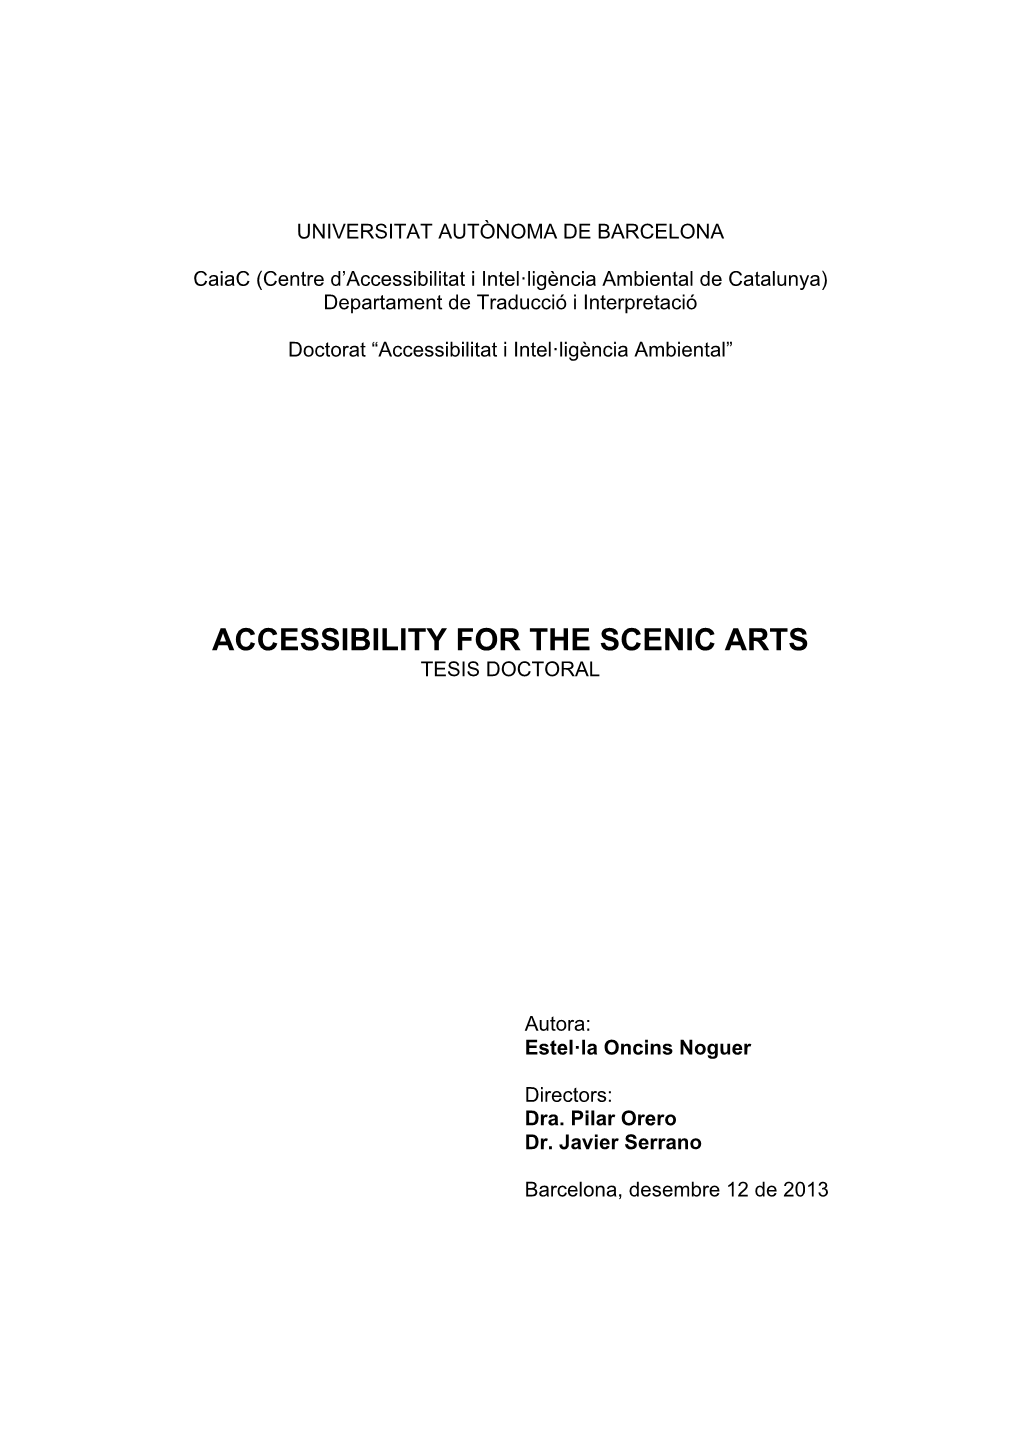 Accessibility for the Scenic Arts Tesis Doctoral